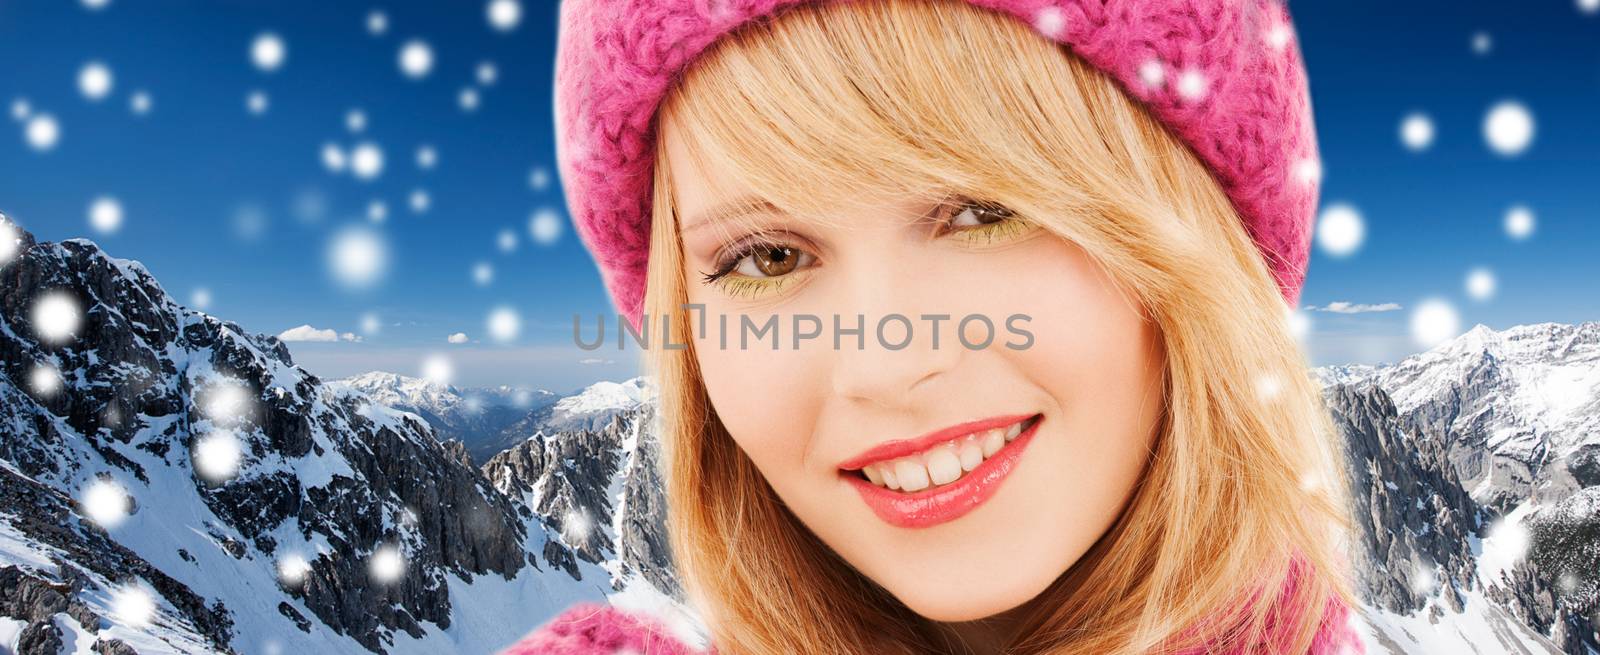 happiness, winter holidays, christmas and people concept - close up of smiling young woman in pink hat and scarf over snowy mountains background